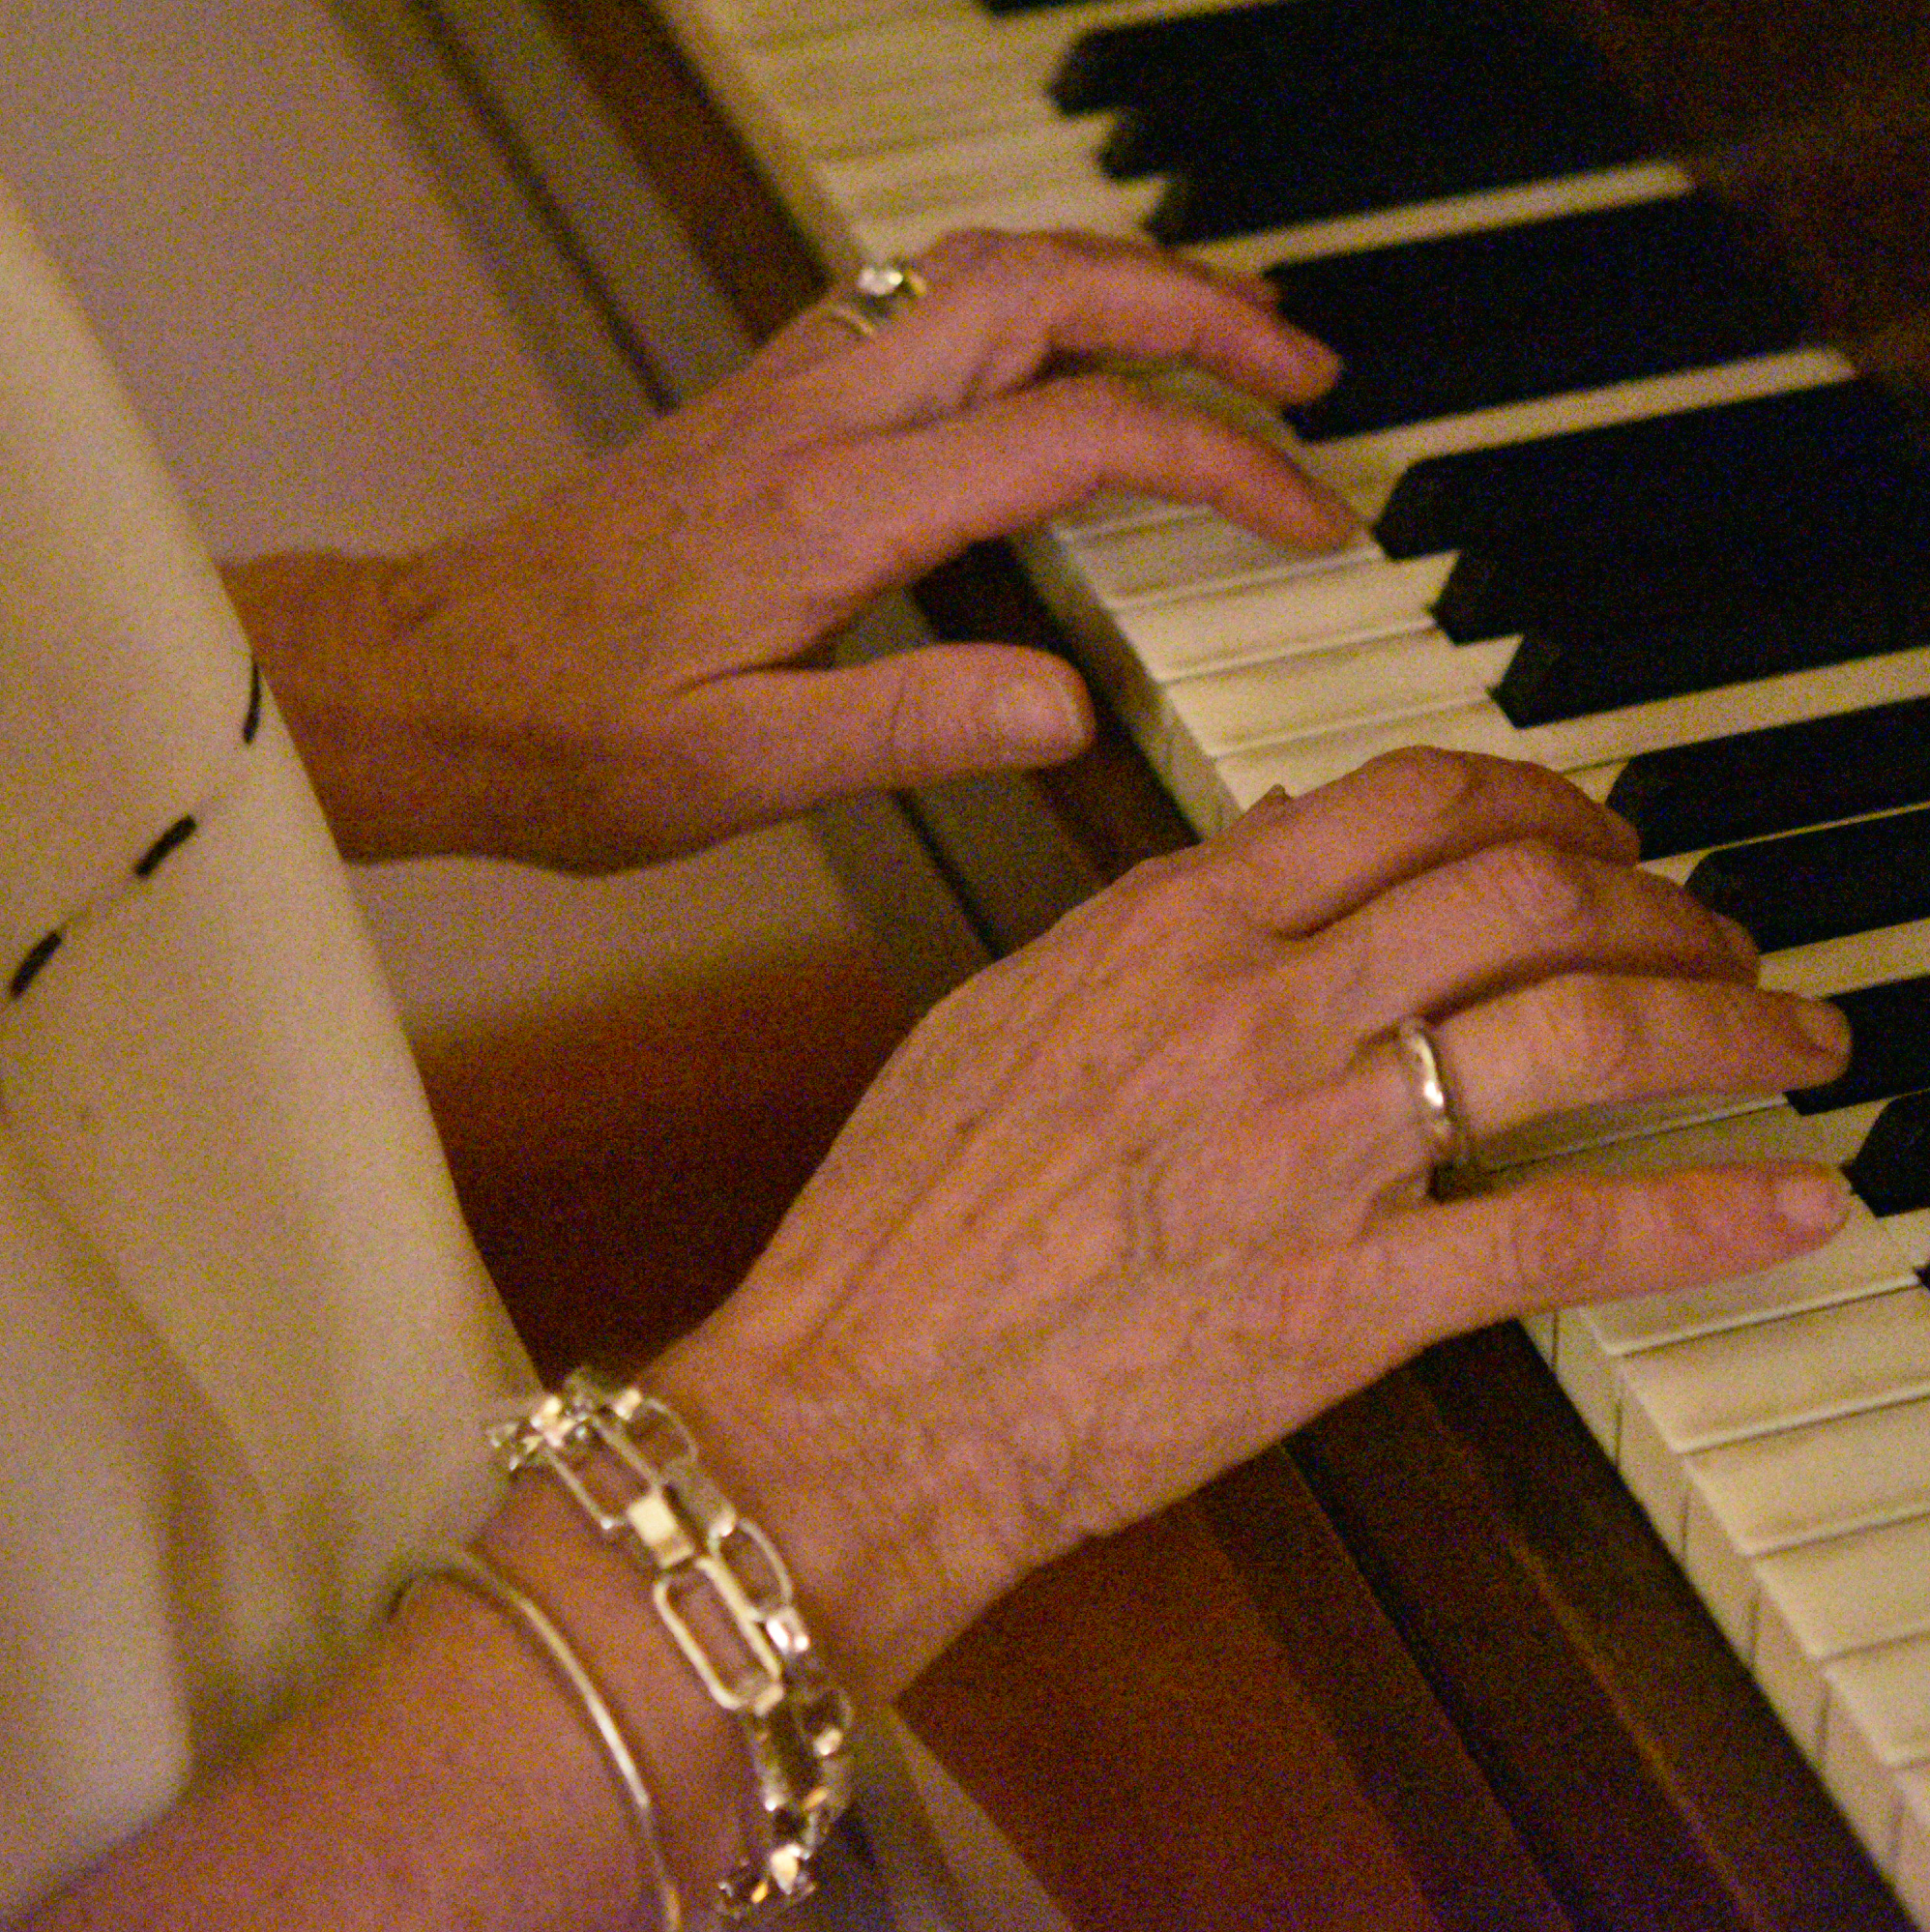 Liz playing piano with the theo, greta, and cast bangle bracelets prominent on her hand.